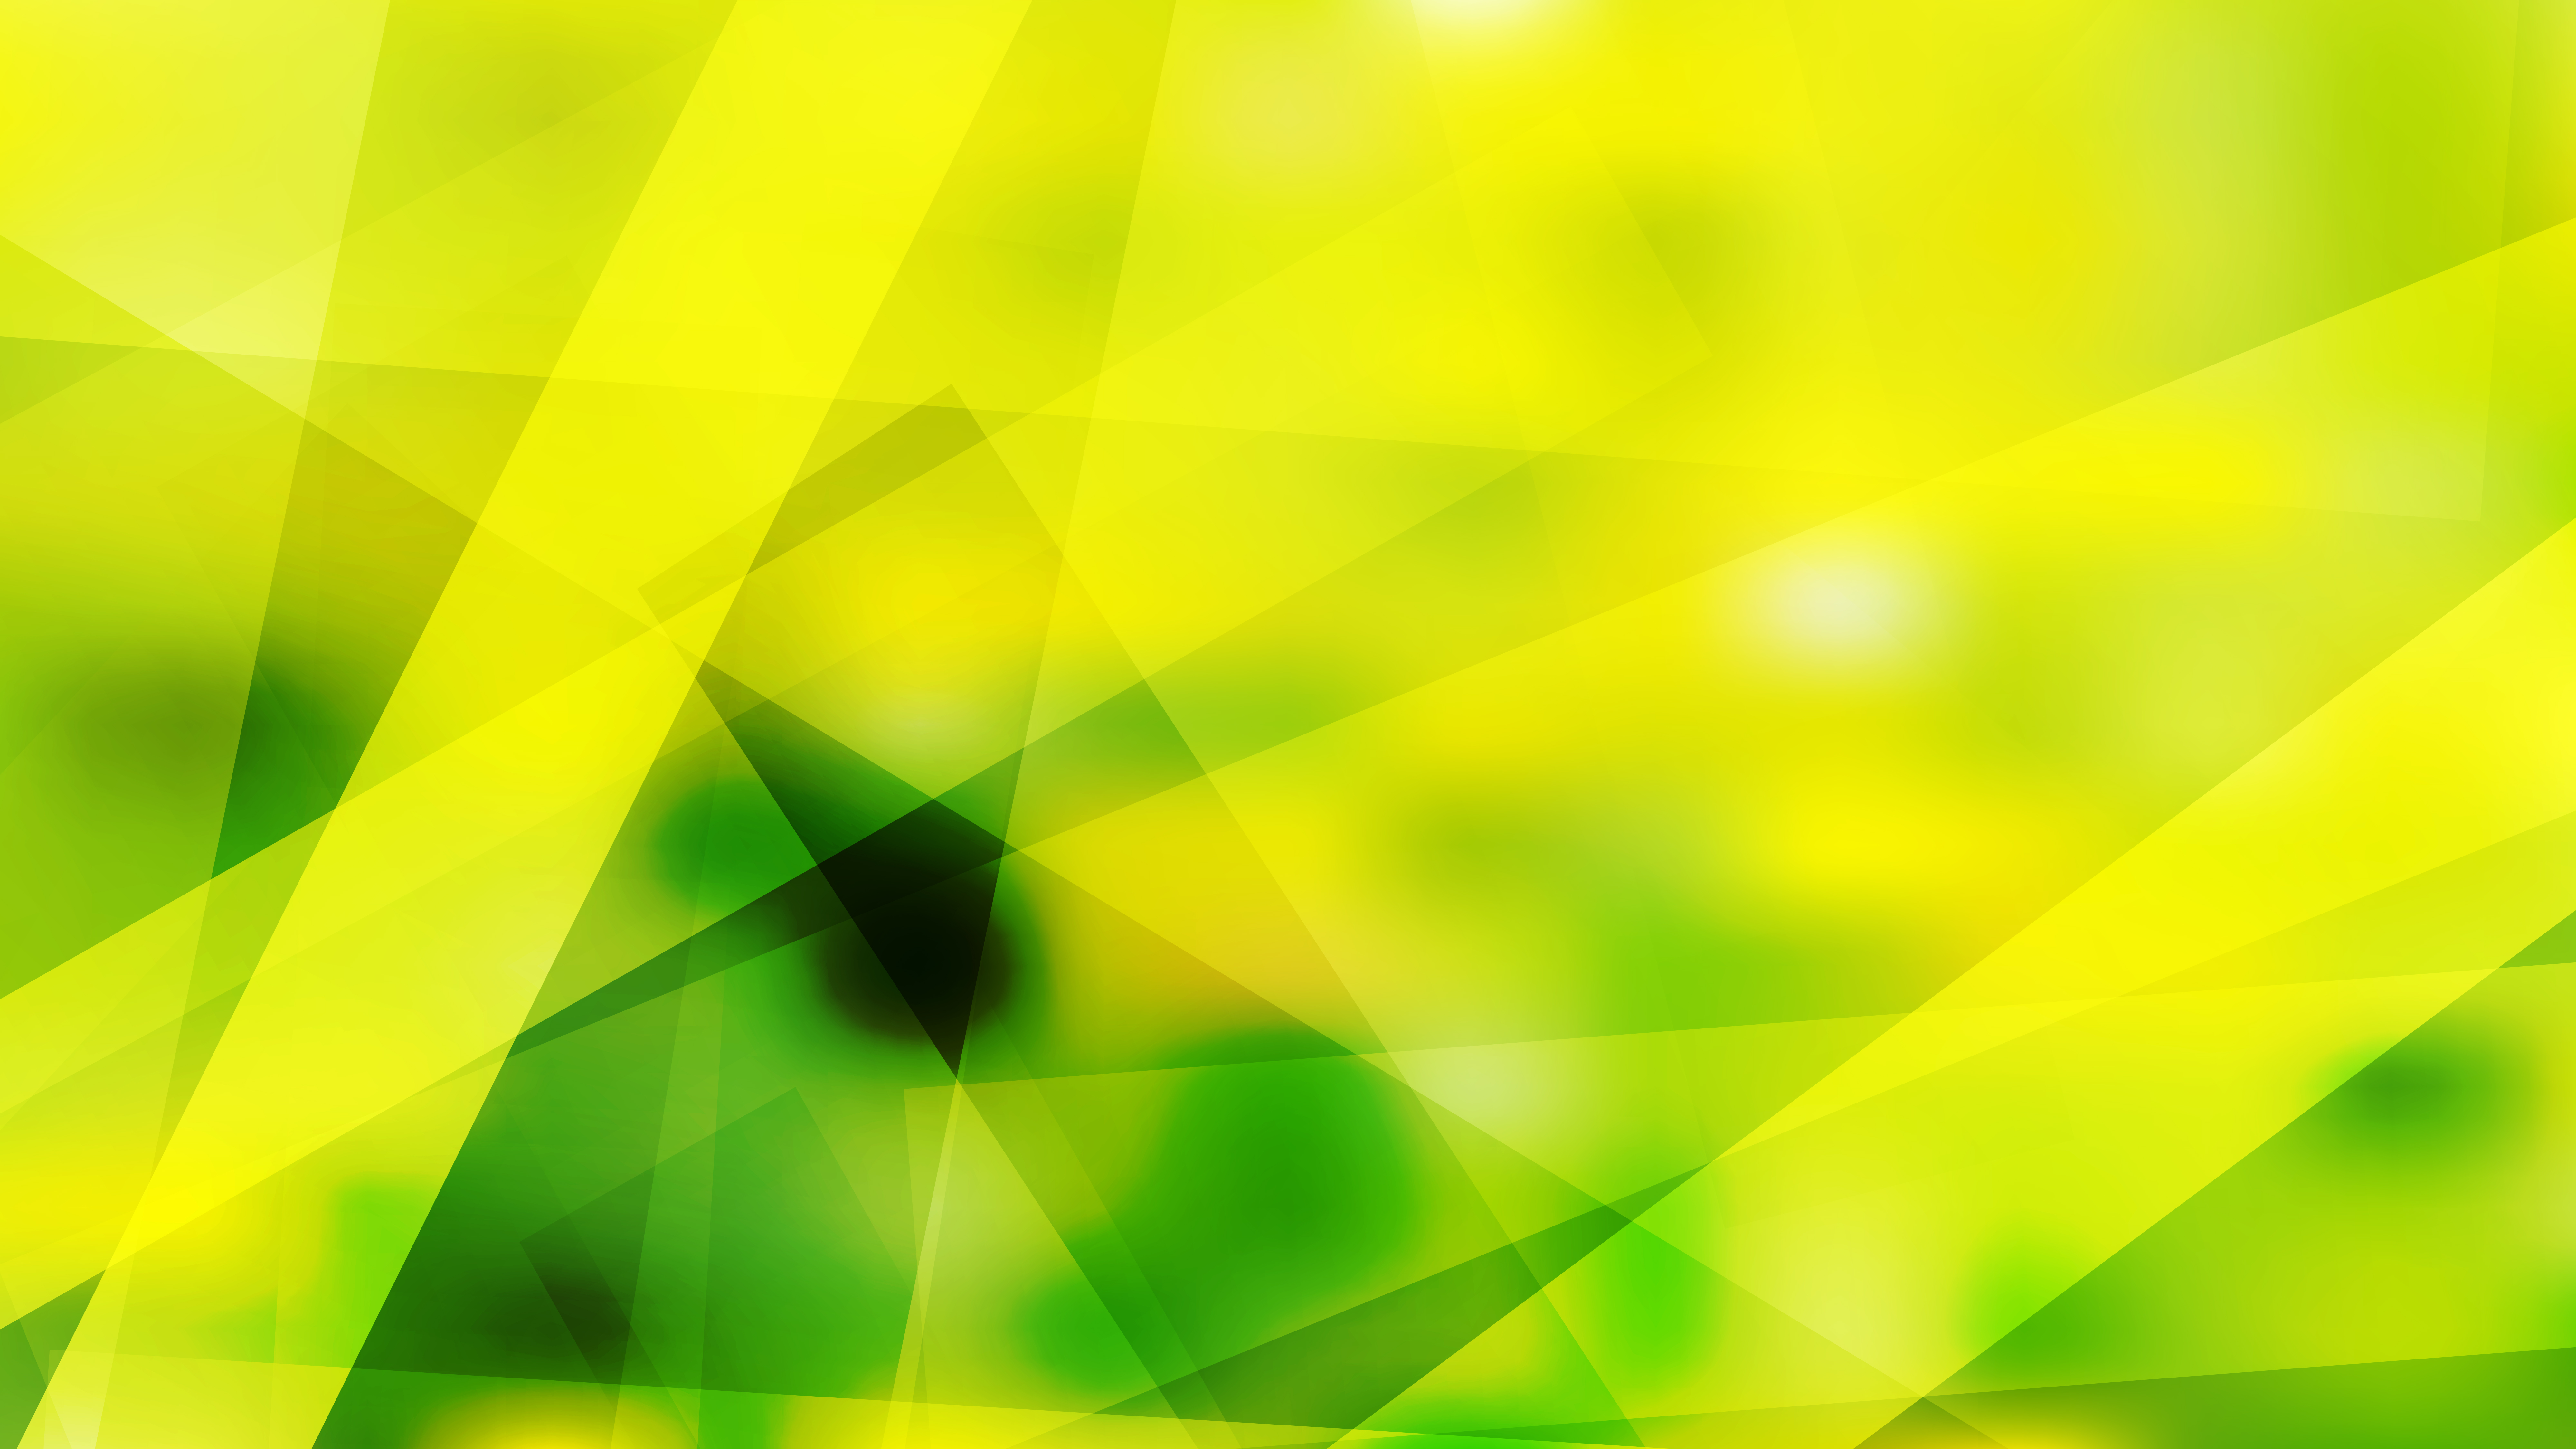 Free Geometric Abstract Green and Yellow Background Graphic